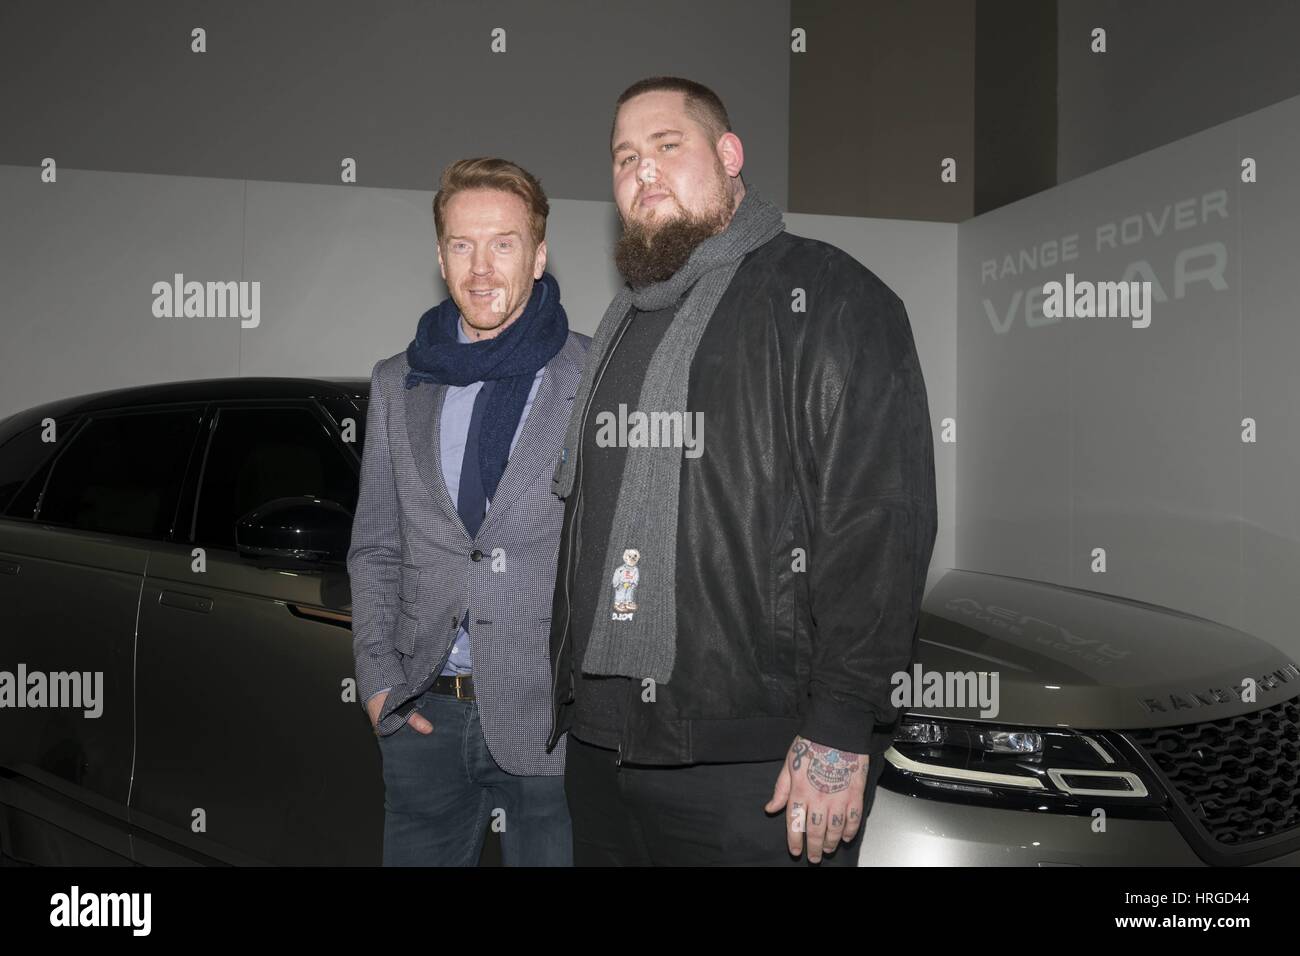 London, United Kingdom Of Great Britain And Northern Ireland. 01st Mar, 2017. Damian Lewis and RagÂ nÂ Bone Man at Range Rover Velar World Premiere in the London Design Museum. London, UK. 02/03/2017 | usage worldwide Credit: dpa/Alamy Live News Stock Photo